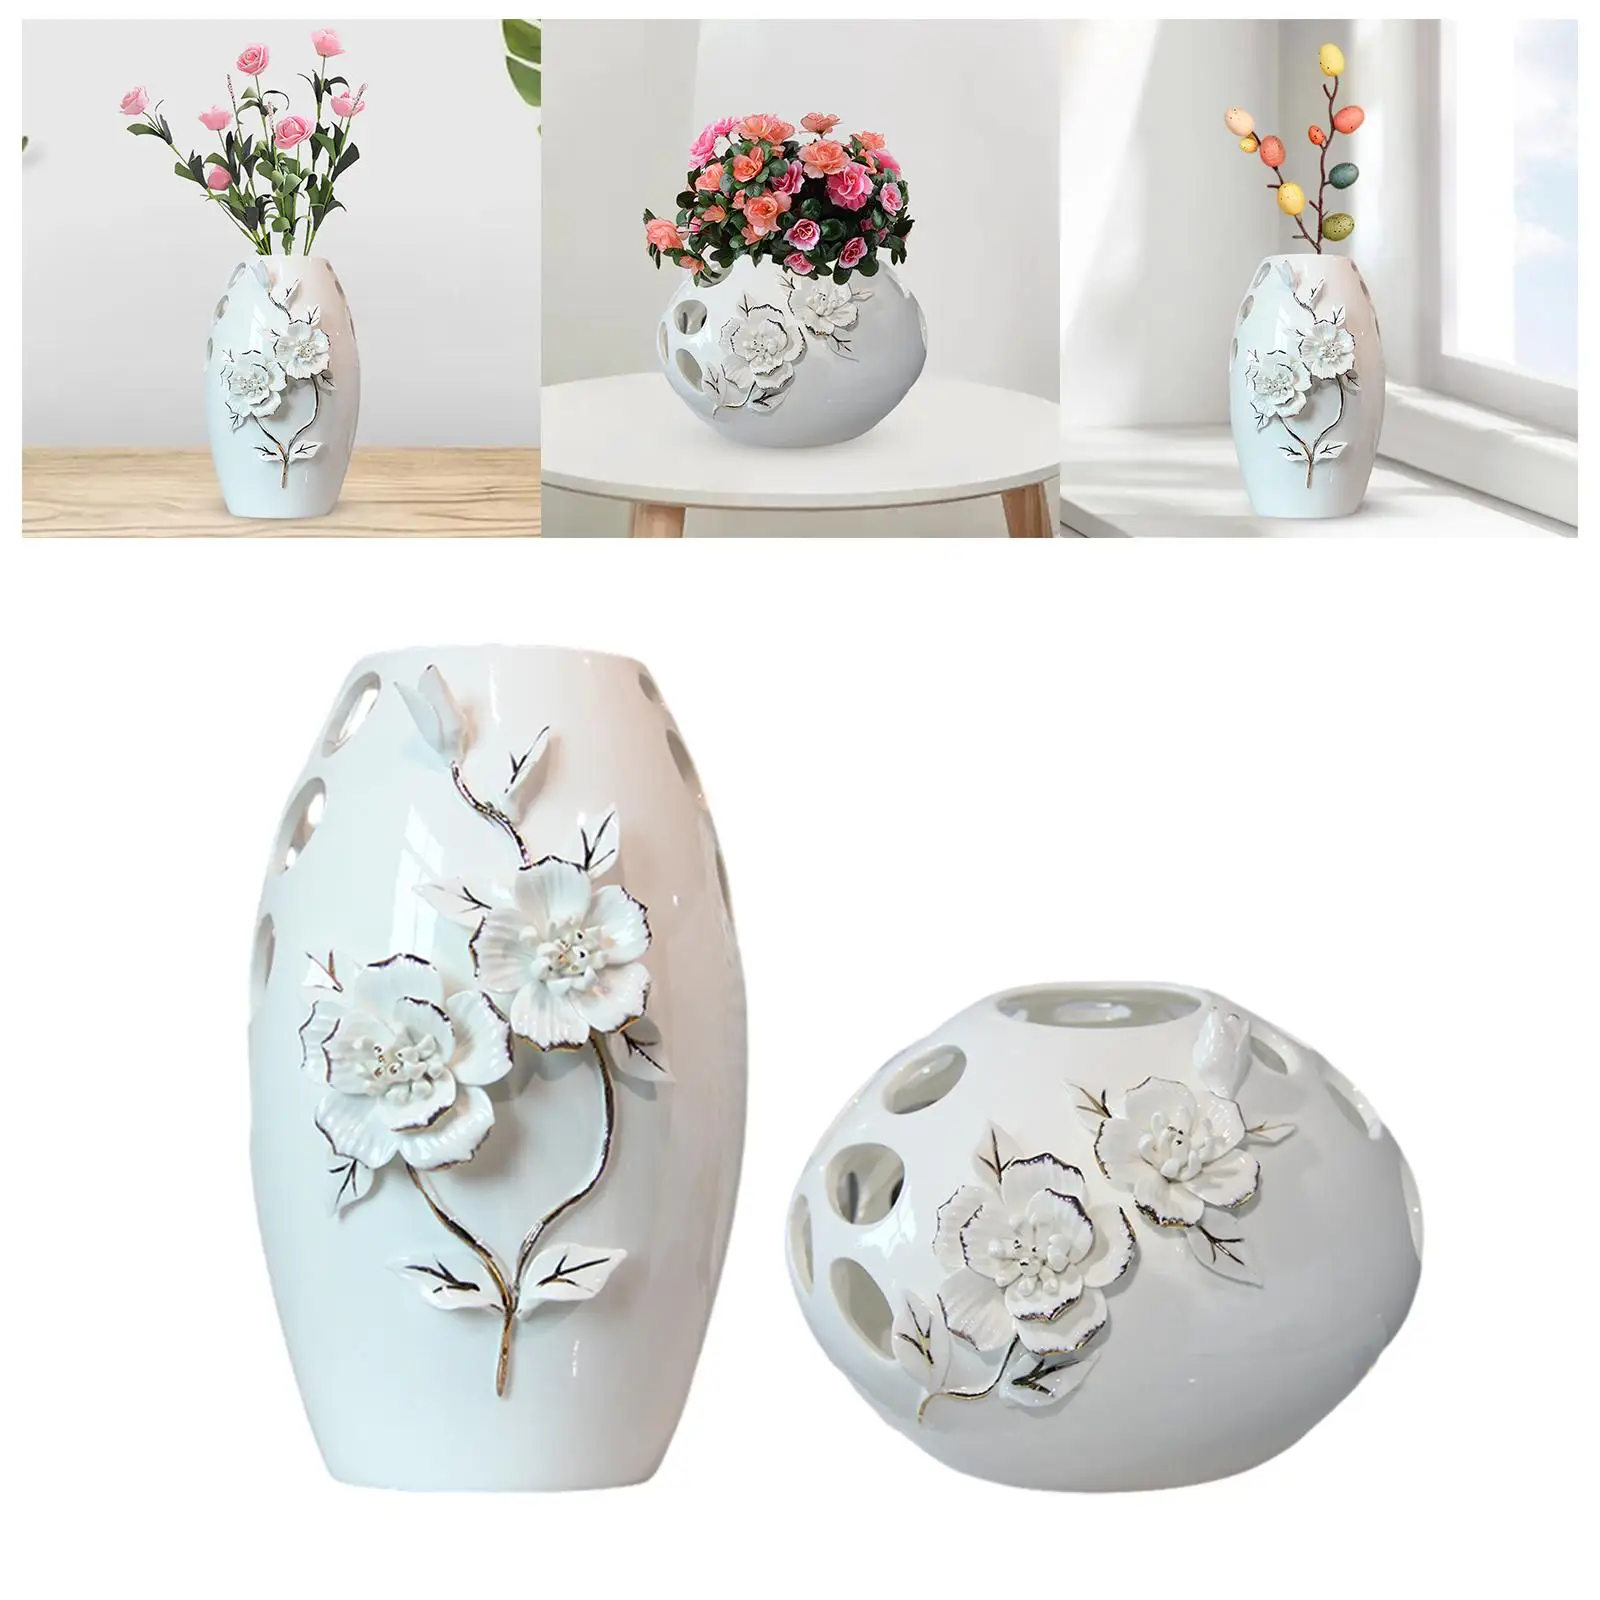 White Ceramic Vase Table Ornament Hollow Out for Mantel End Table Decor Fireplace Dresser Home Office Bedroom Multifunctional